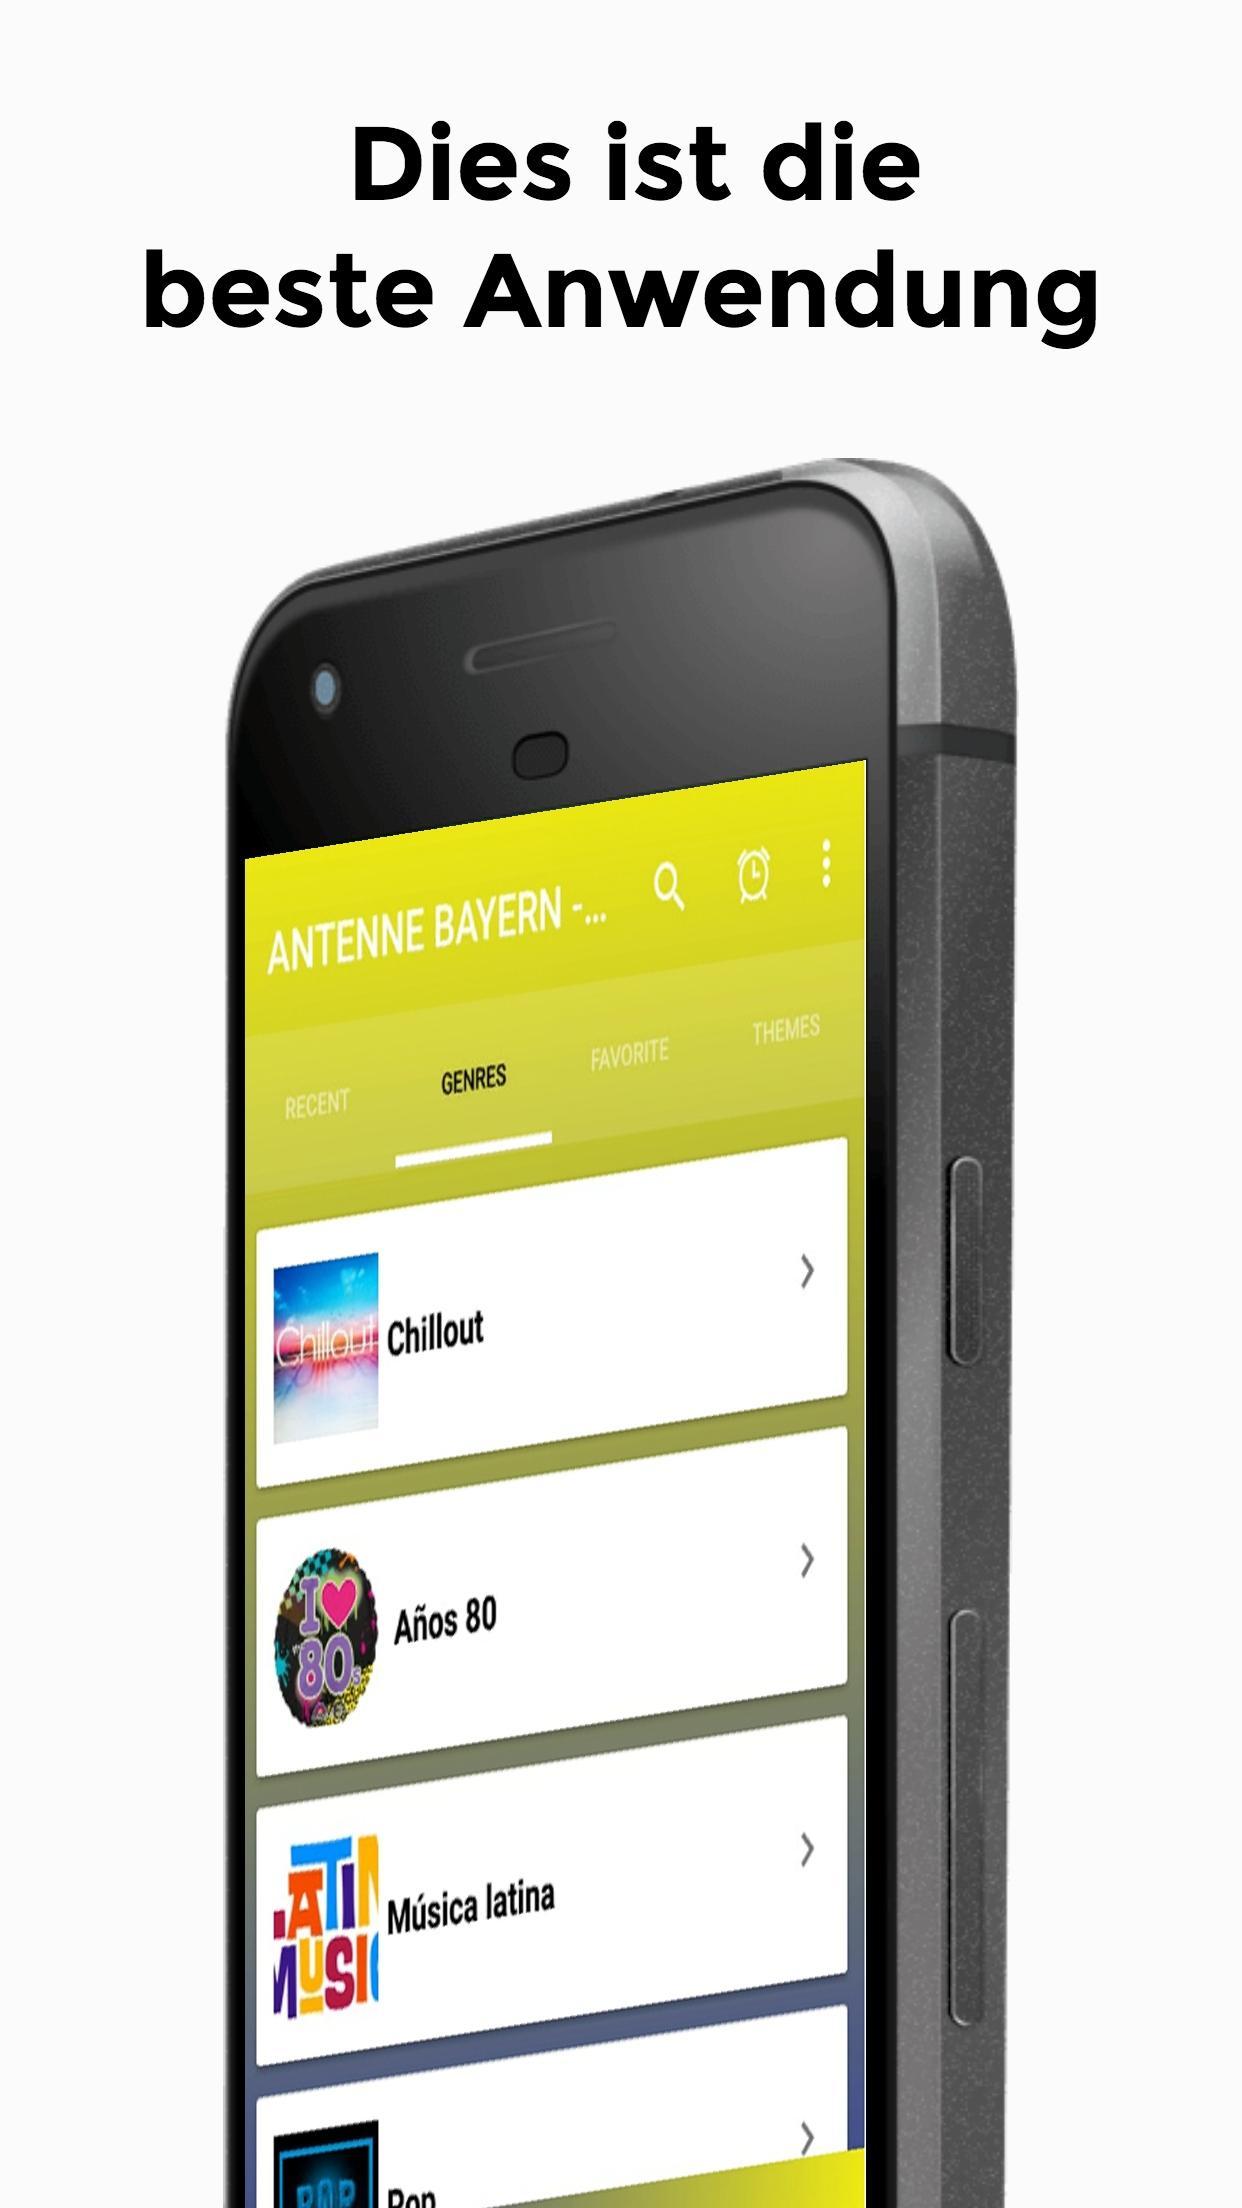 NDR 2 Radio for Android - APK Download